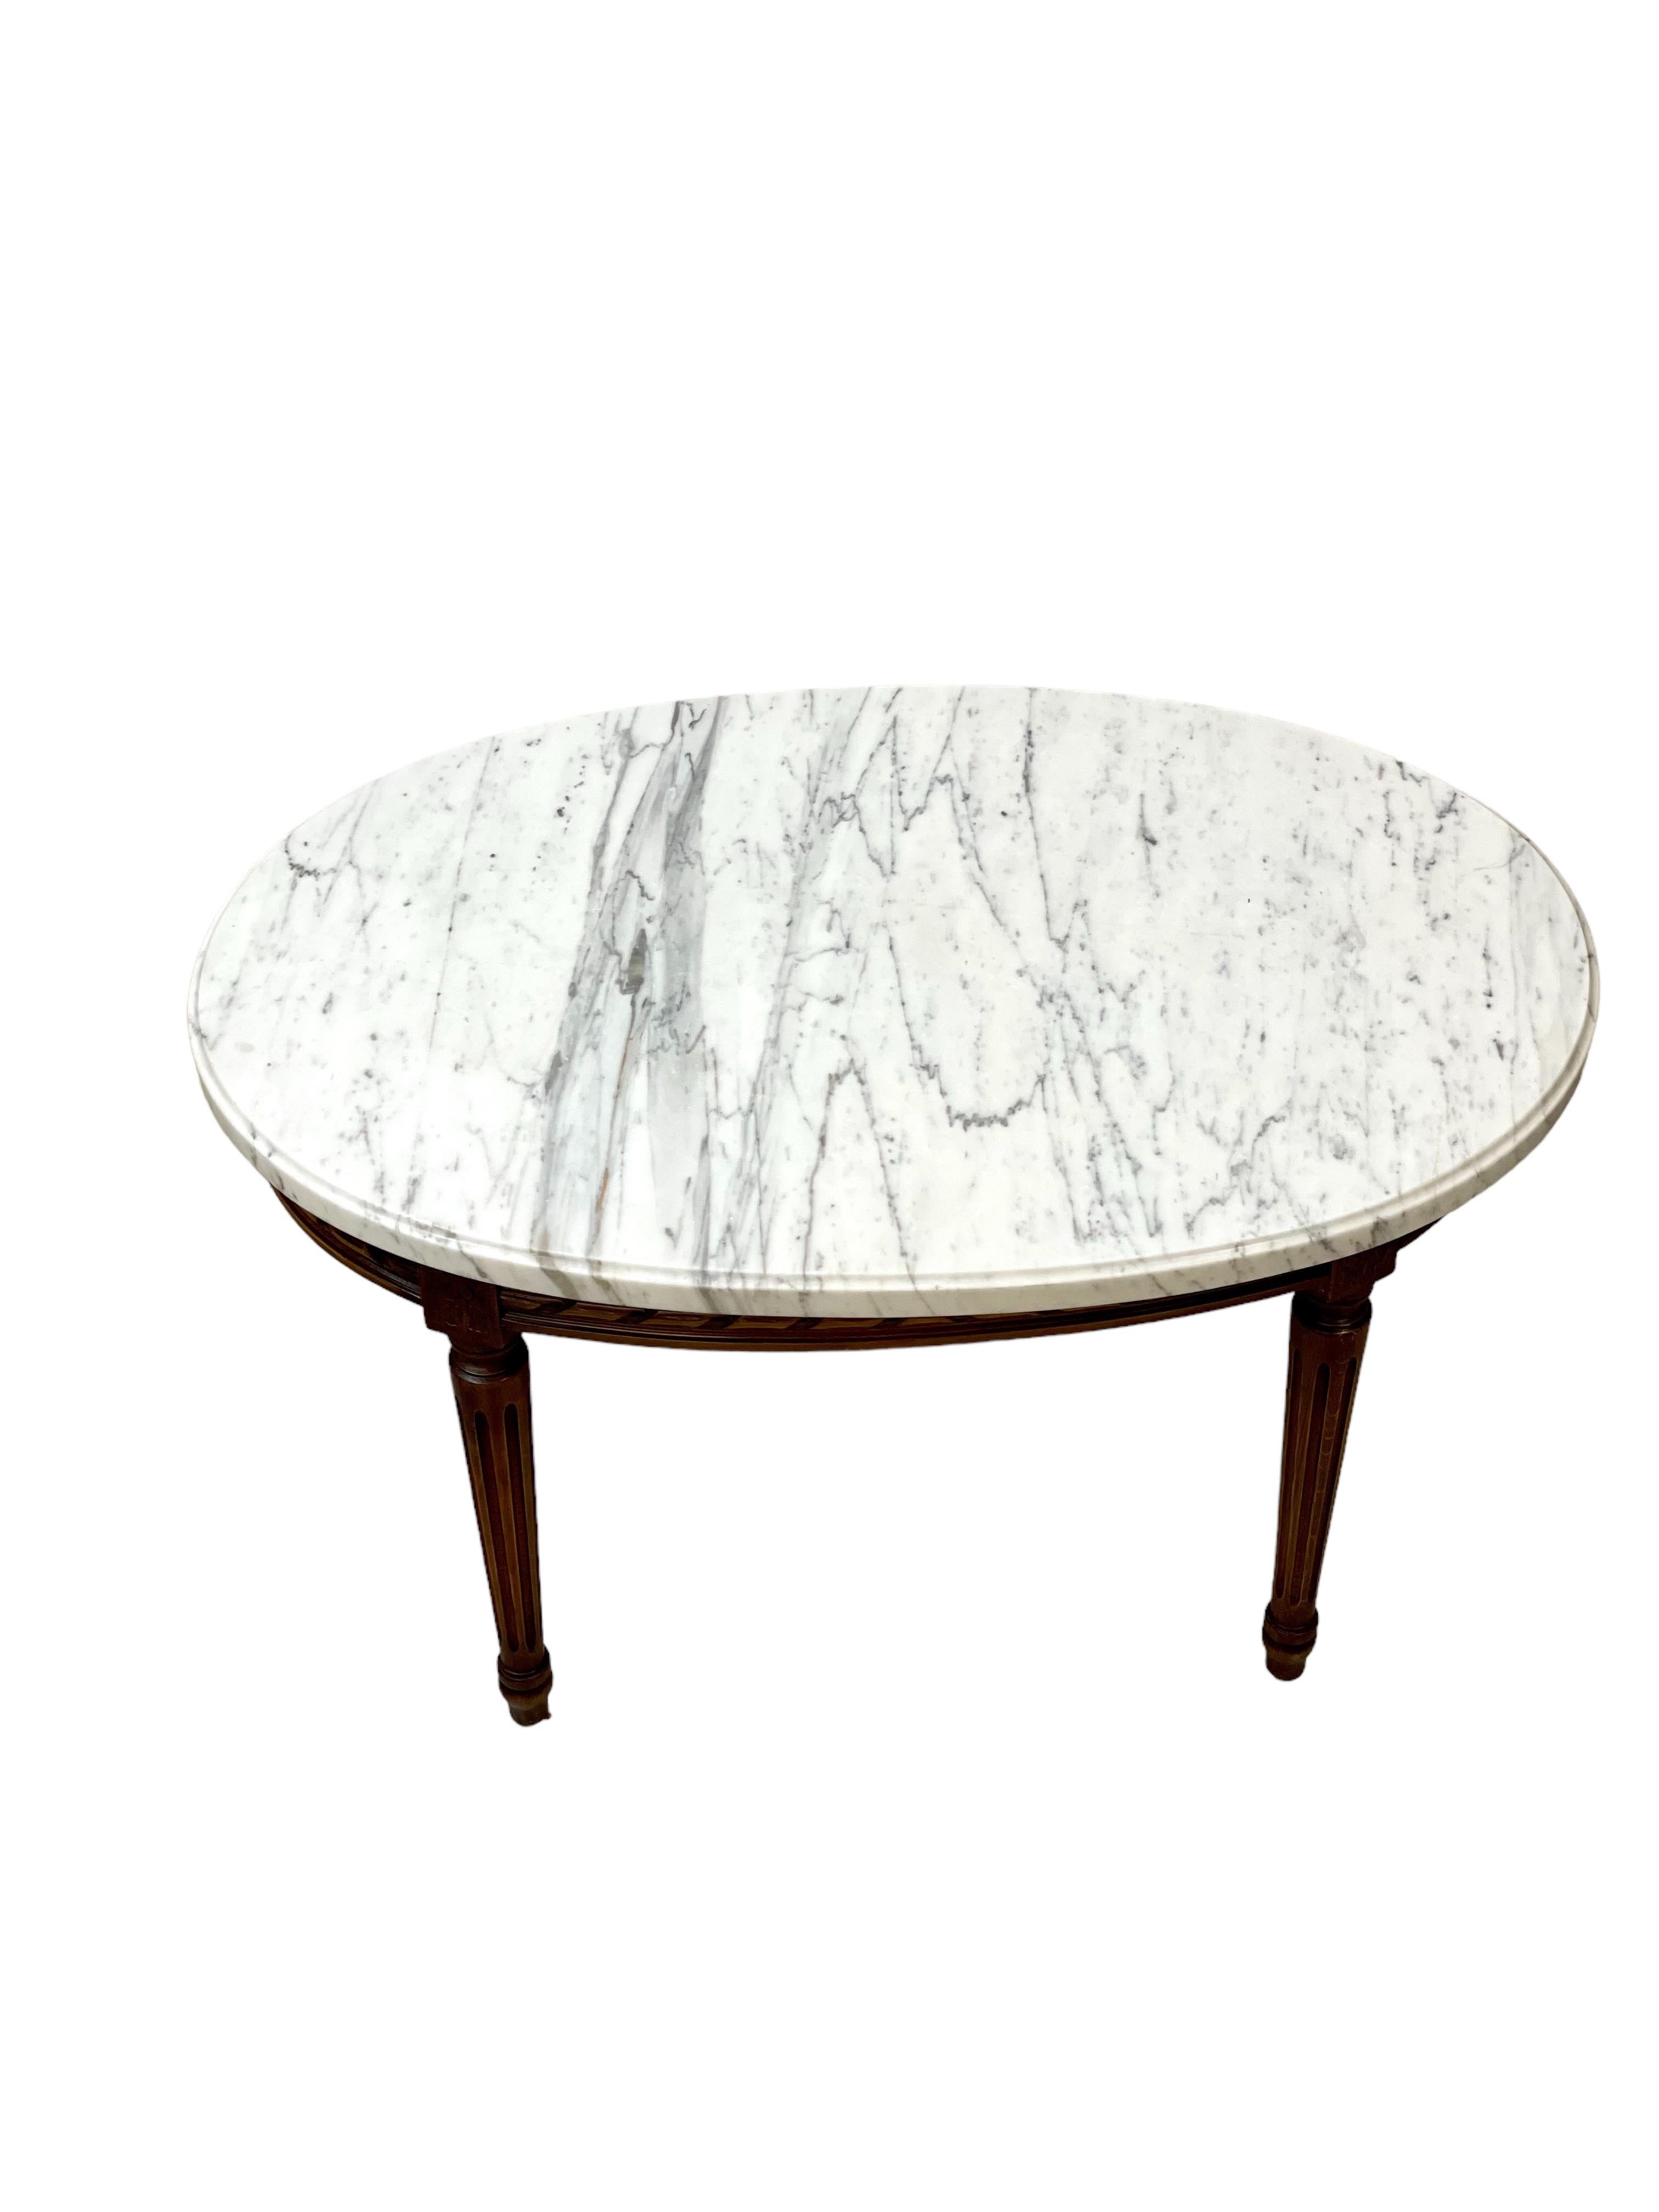 A very fine French Louis XVI-style oval coffee table with a stunning white and grey-veined marble top. A simple but elegant hand-carved twisted-rope style frieze adorns the burnished wooden apron, which links the four tapered and fluted 'Federal'